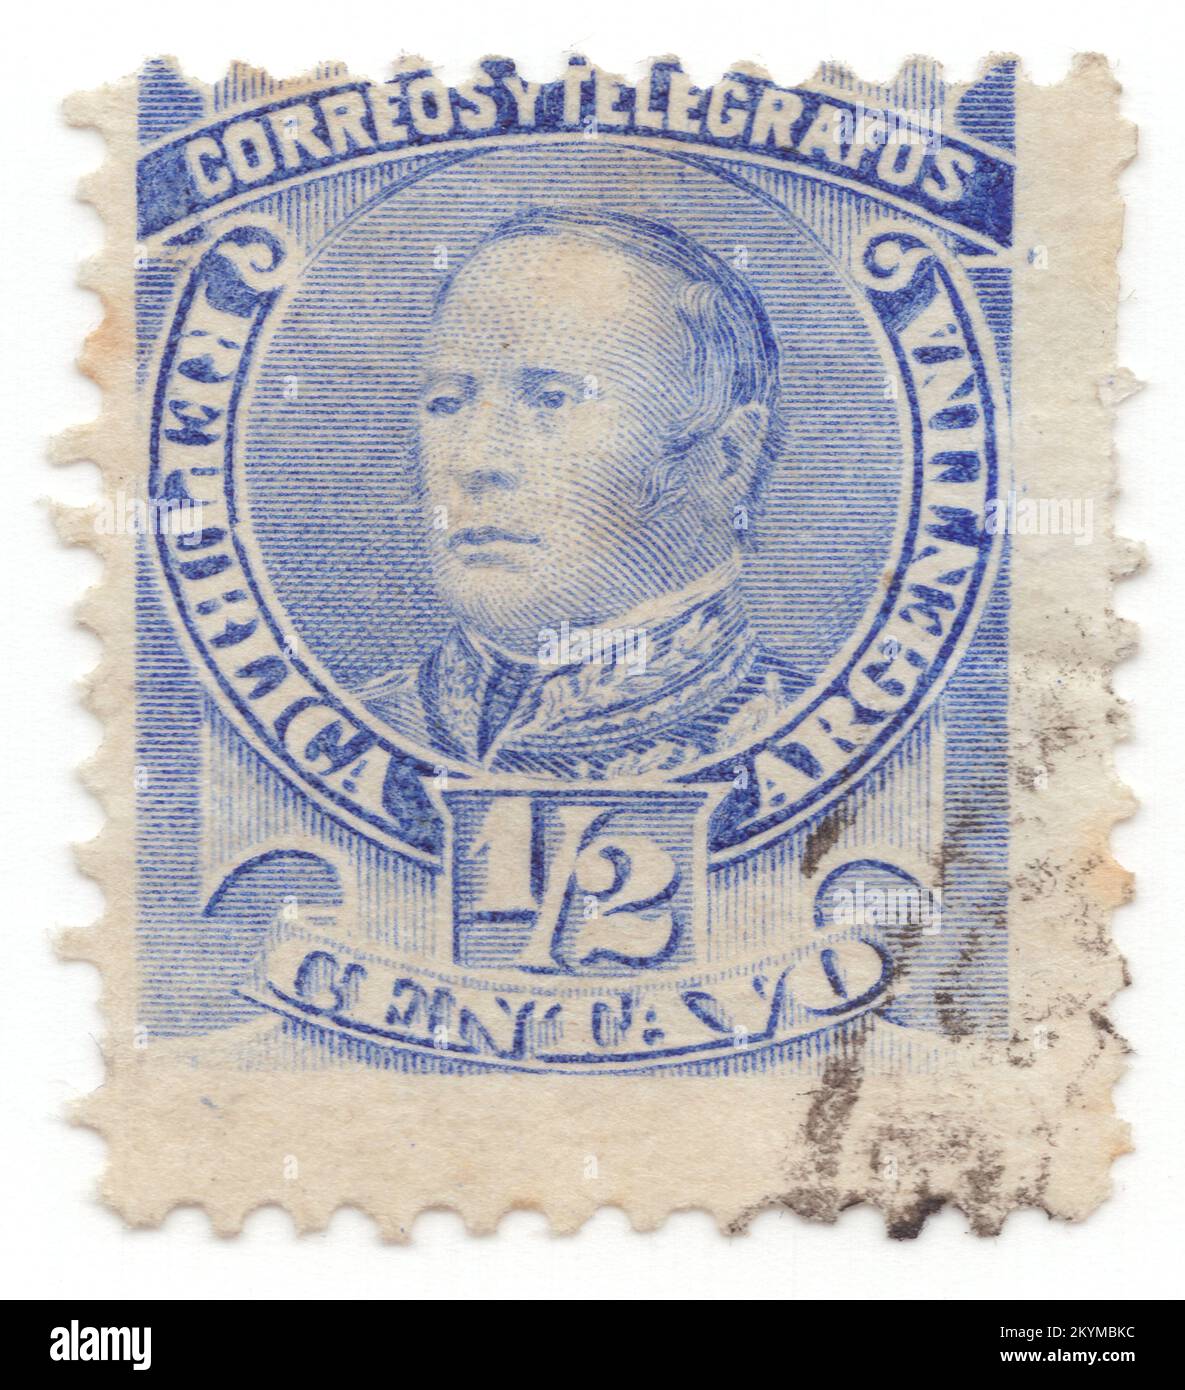 ARGENTINA - 1888: 1 centavo brown postage stamp depicting portrait of Velez Sarsfield. Dalmacio Vélez Sarsfield was an Argentine lawyer and politician who wrote the Civil Code of Argentina of 1869, which remained in force until 2015, when it was replaced by the new Código Civil y Comercial de la Nacion. Mitre's election to the presidency in 1862 made Velez Sarsfield the nation's Finance Minister. He obtained congressional passage in 1863 of the Commercial Code he had earlier created for Buenos Aires, and in 1864 began work on his landmark Civil Code Stock Photo